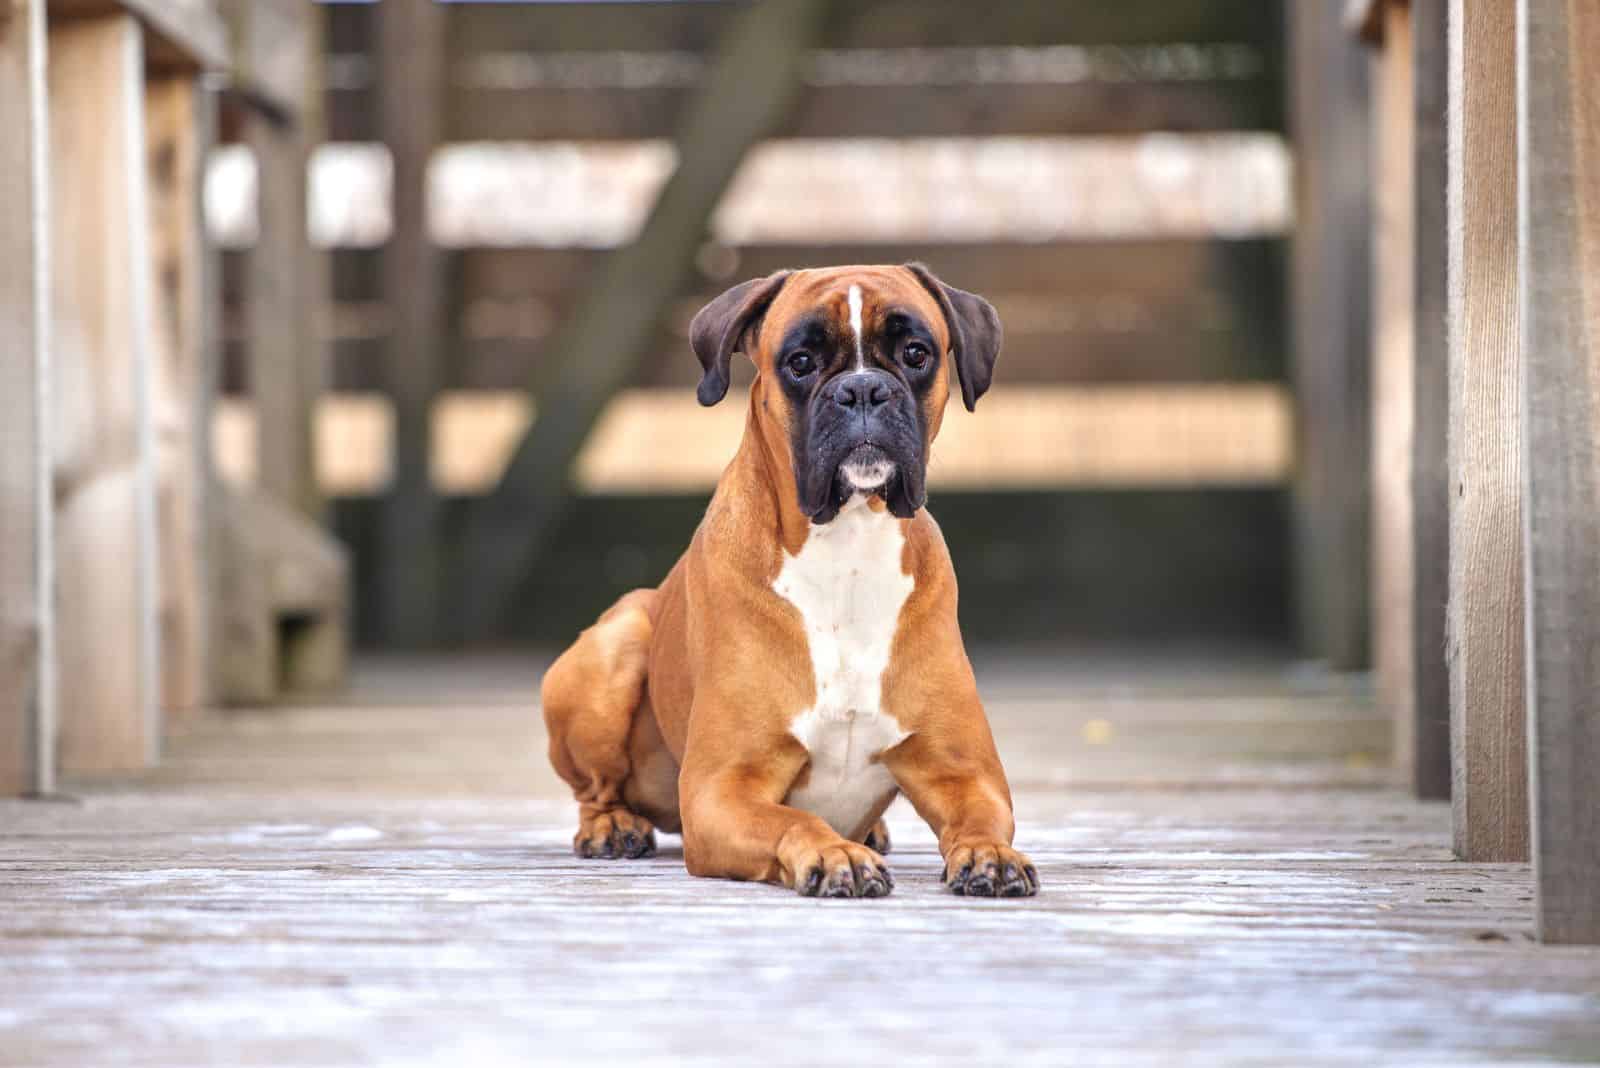 boxer dog outdoors sits and looks ahead